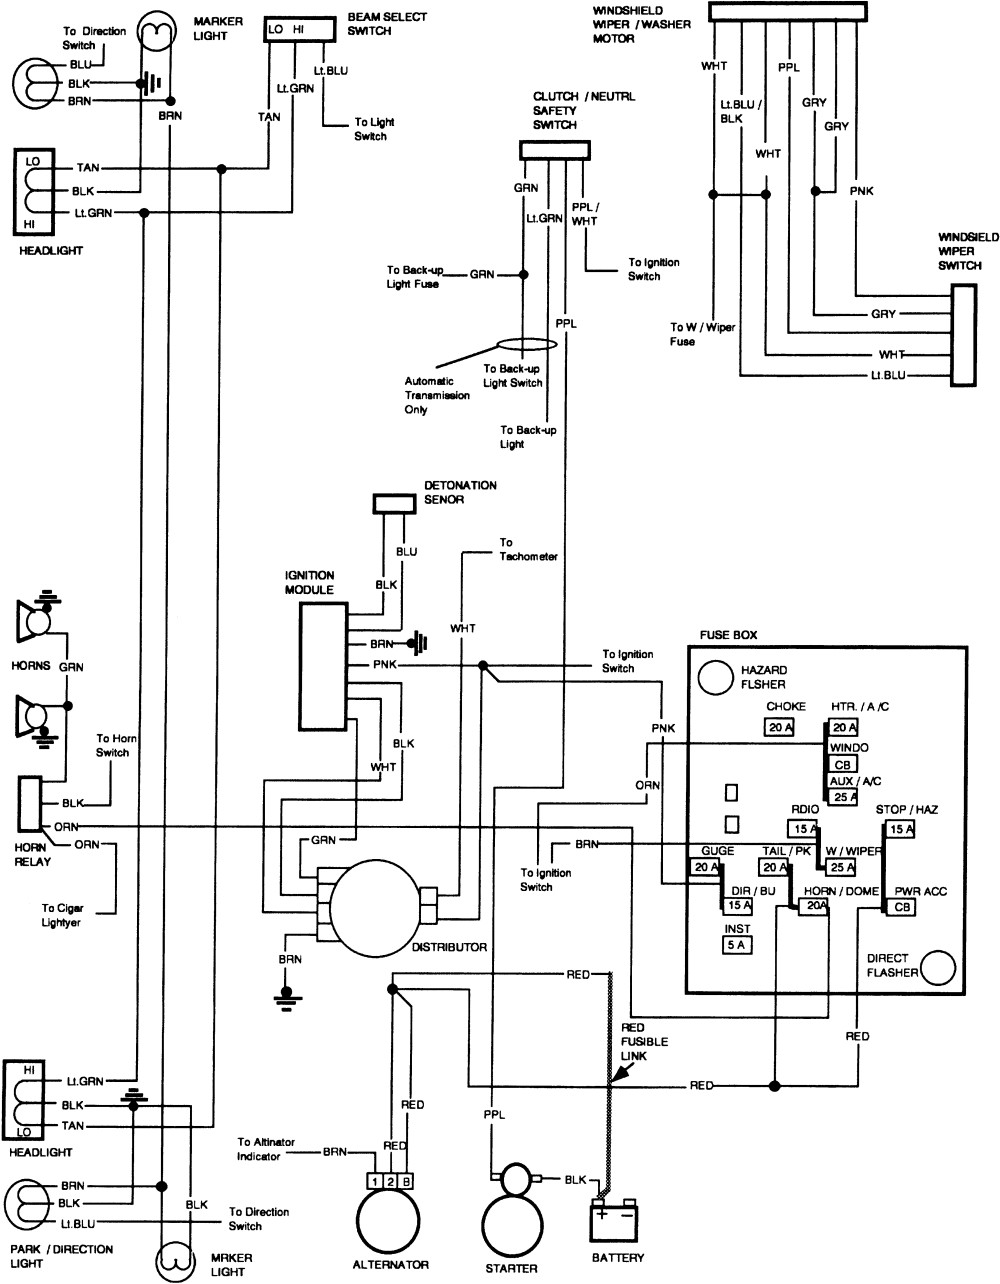 1936 Chevy Wiring Diagram Php Free Download Wiring Diagram